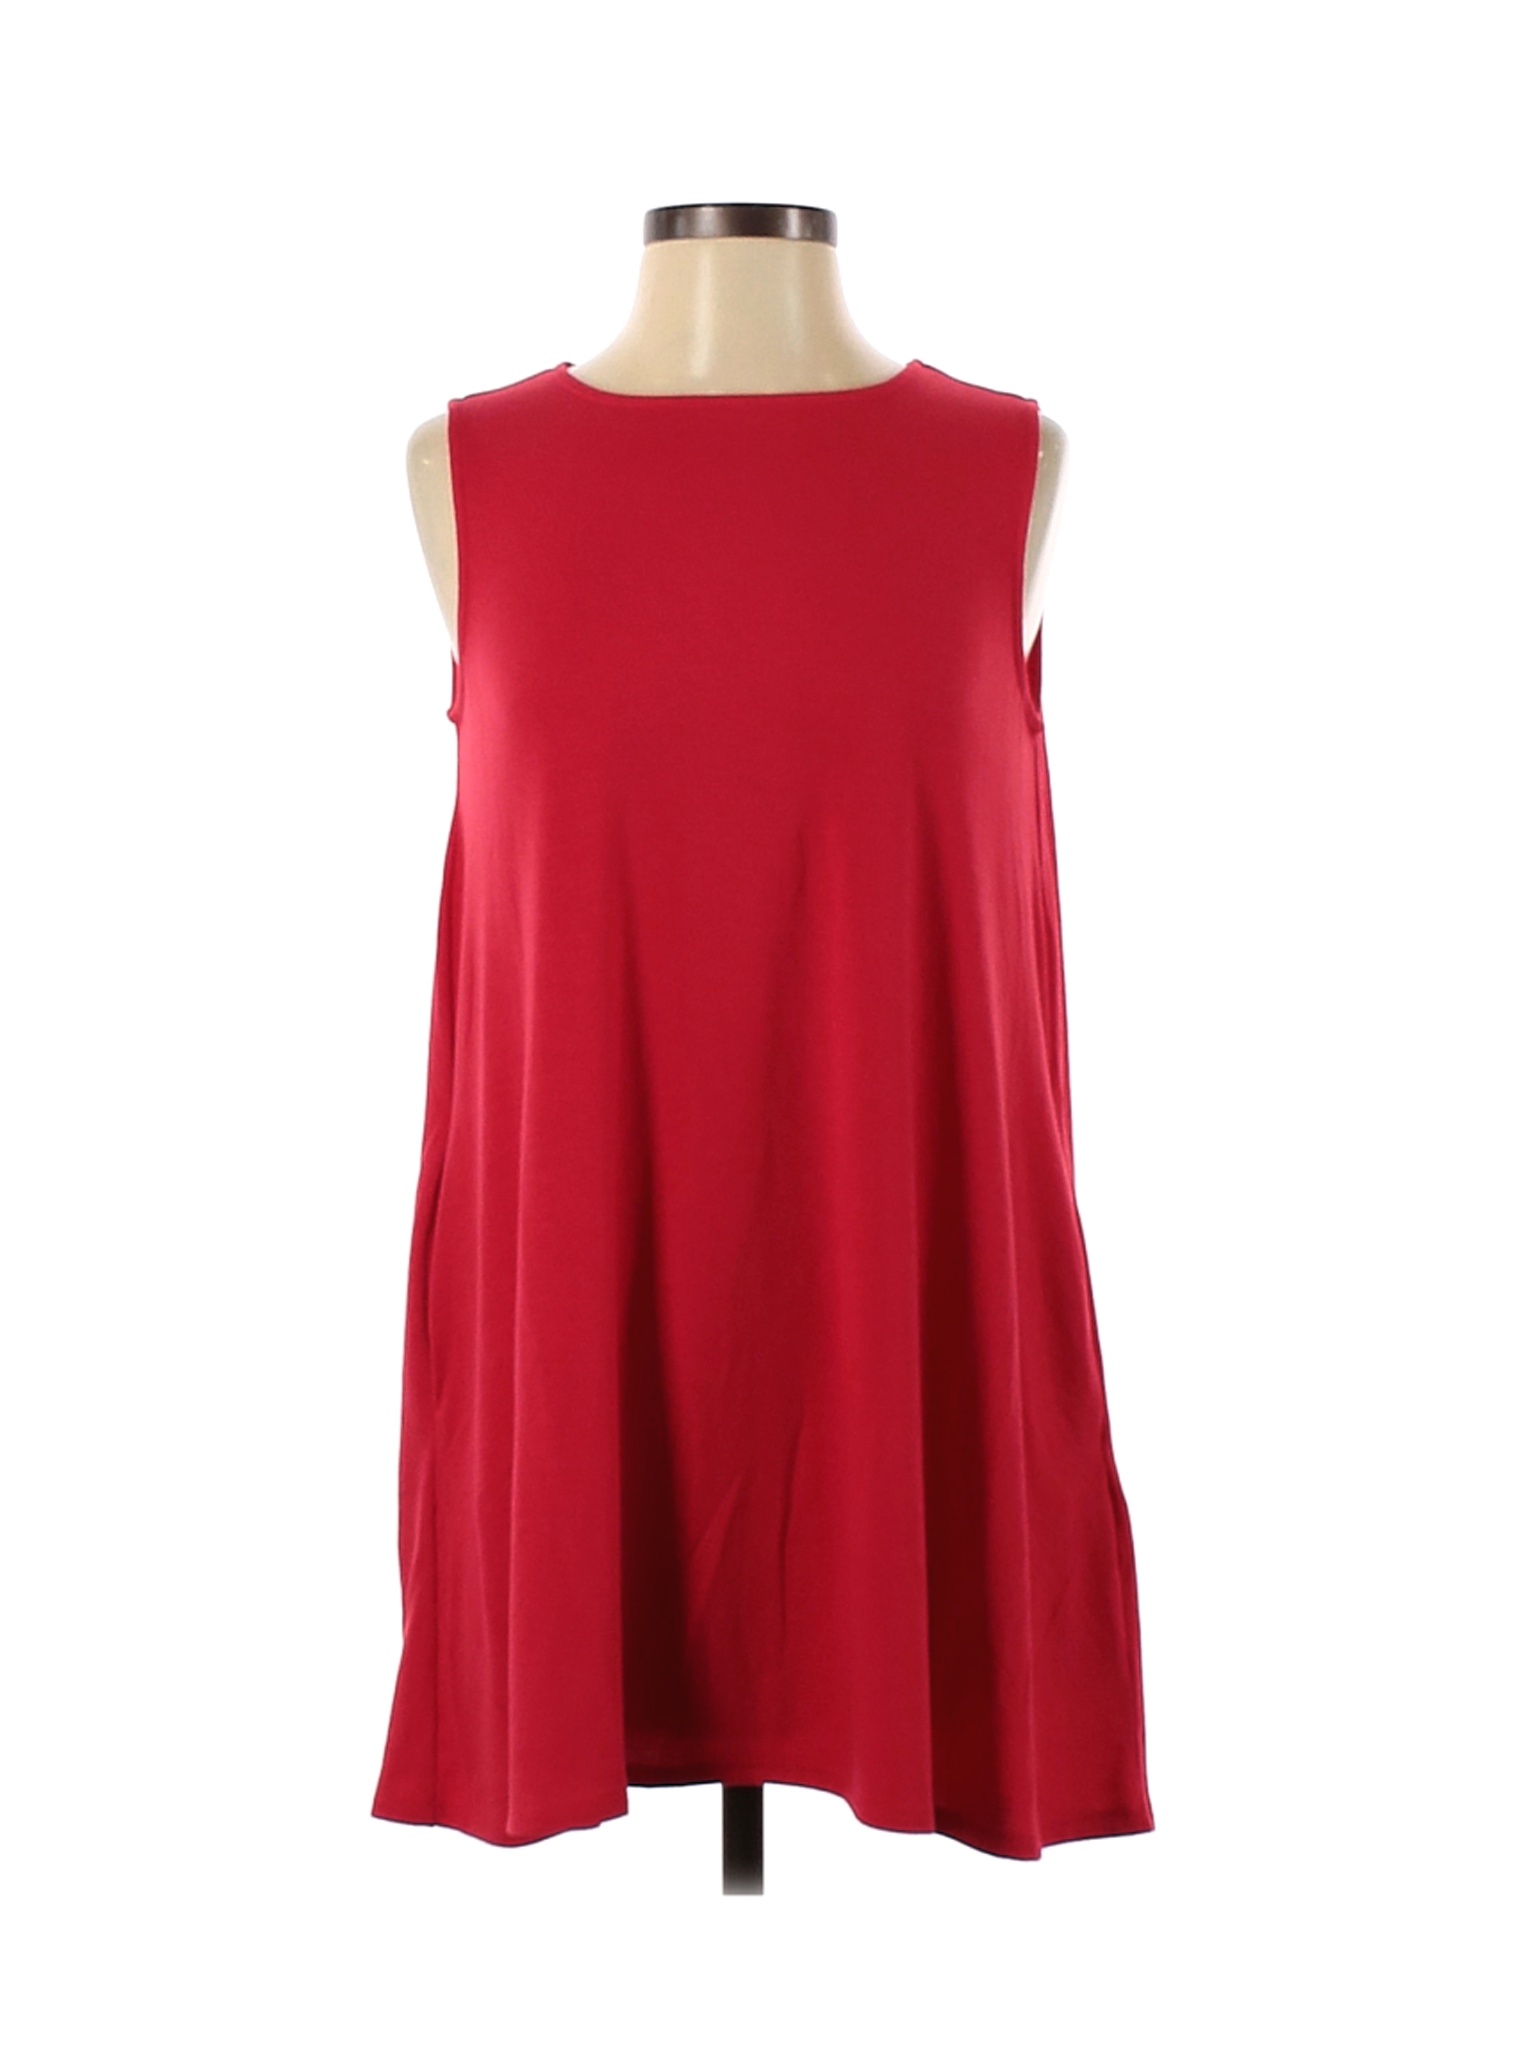 Zenana Premium Solid Red Casual Dress Size S - 62% off | thredUP